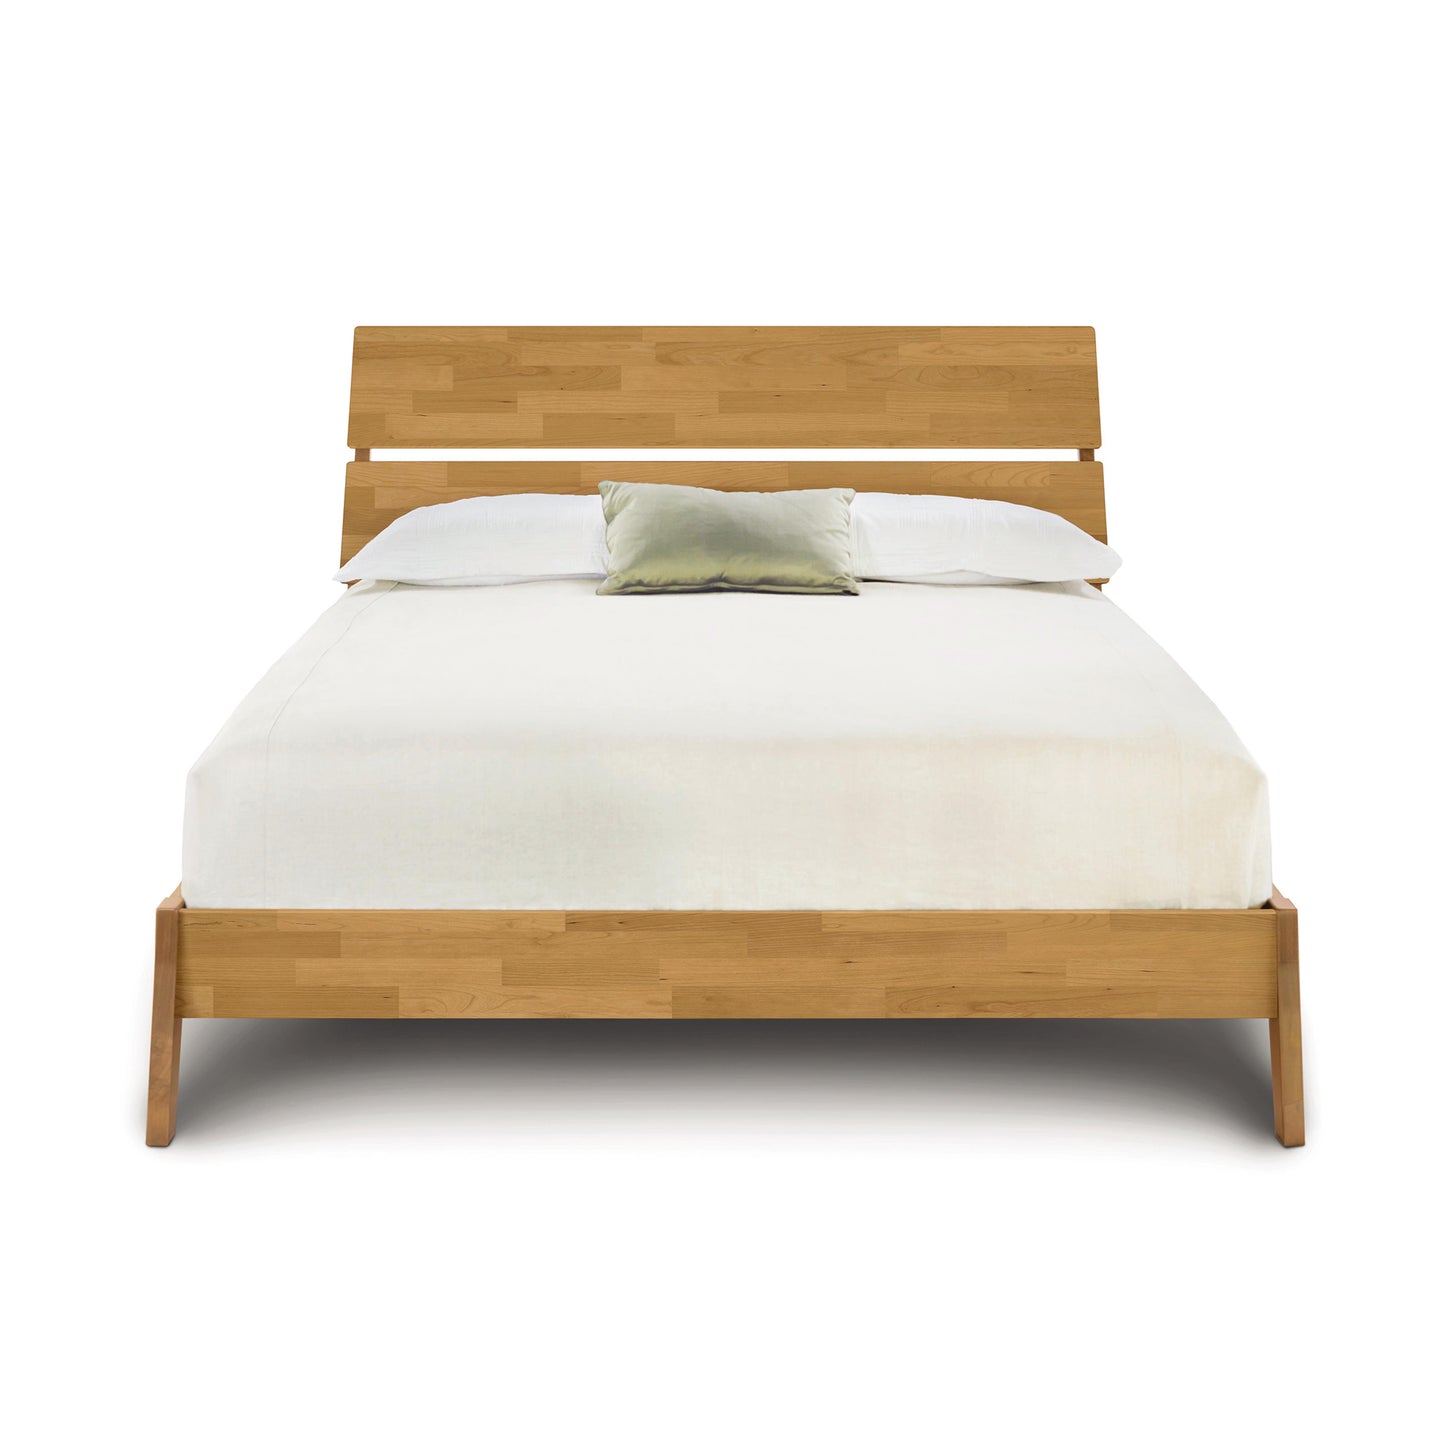 A sustainable Linn Cherry Platform Bed made from cherry hardwood with a wooden headboard and footboard by Copeland Furniture.